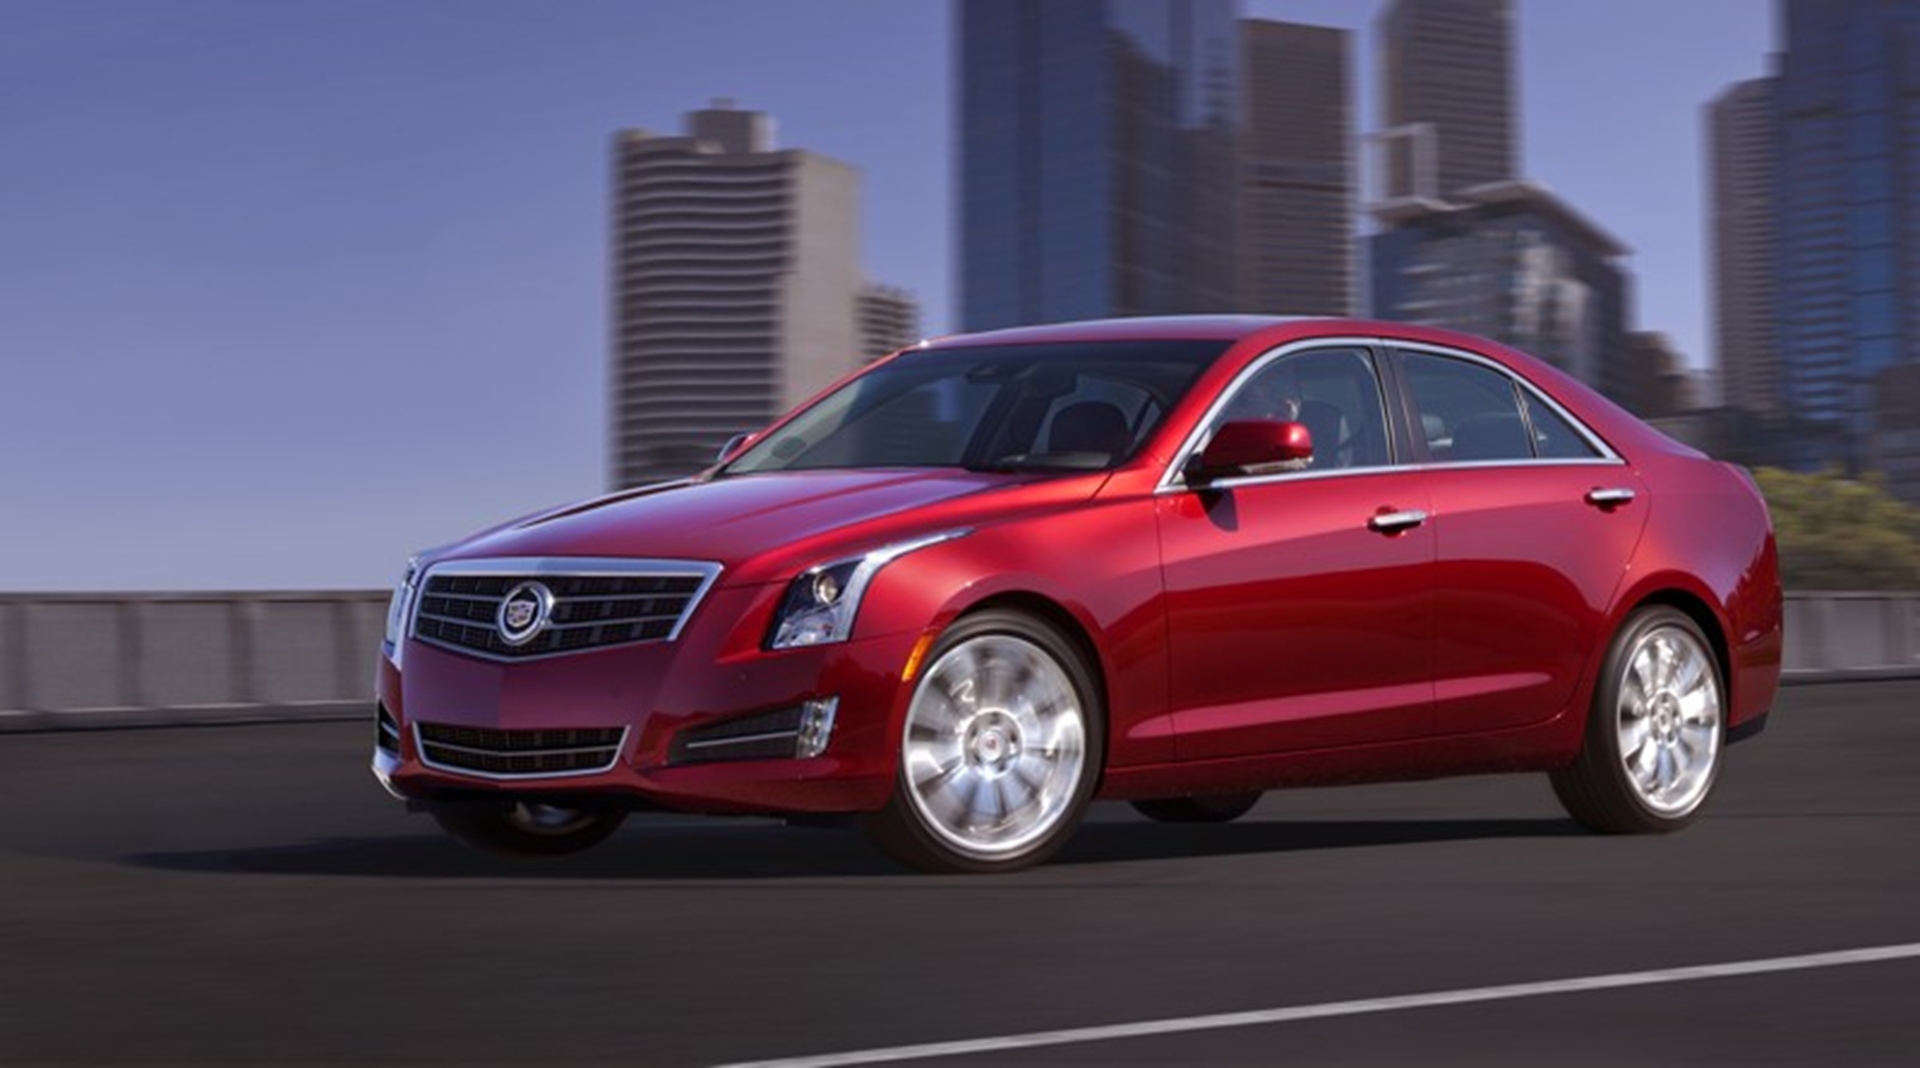 Cadillac ATS Sheds Weight, Gains Agility and Efficiency